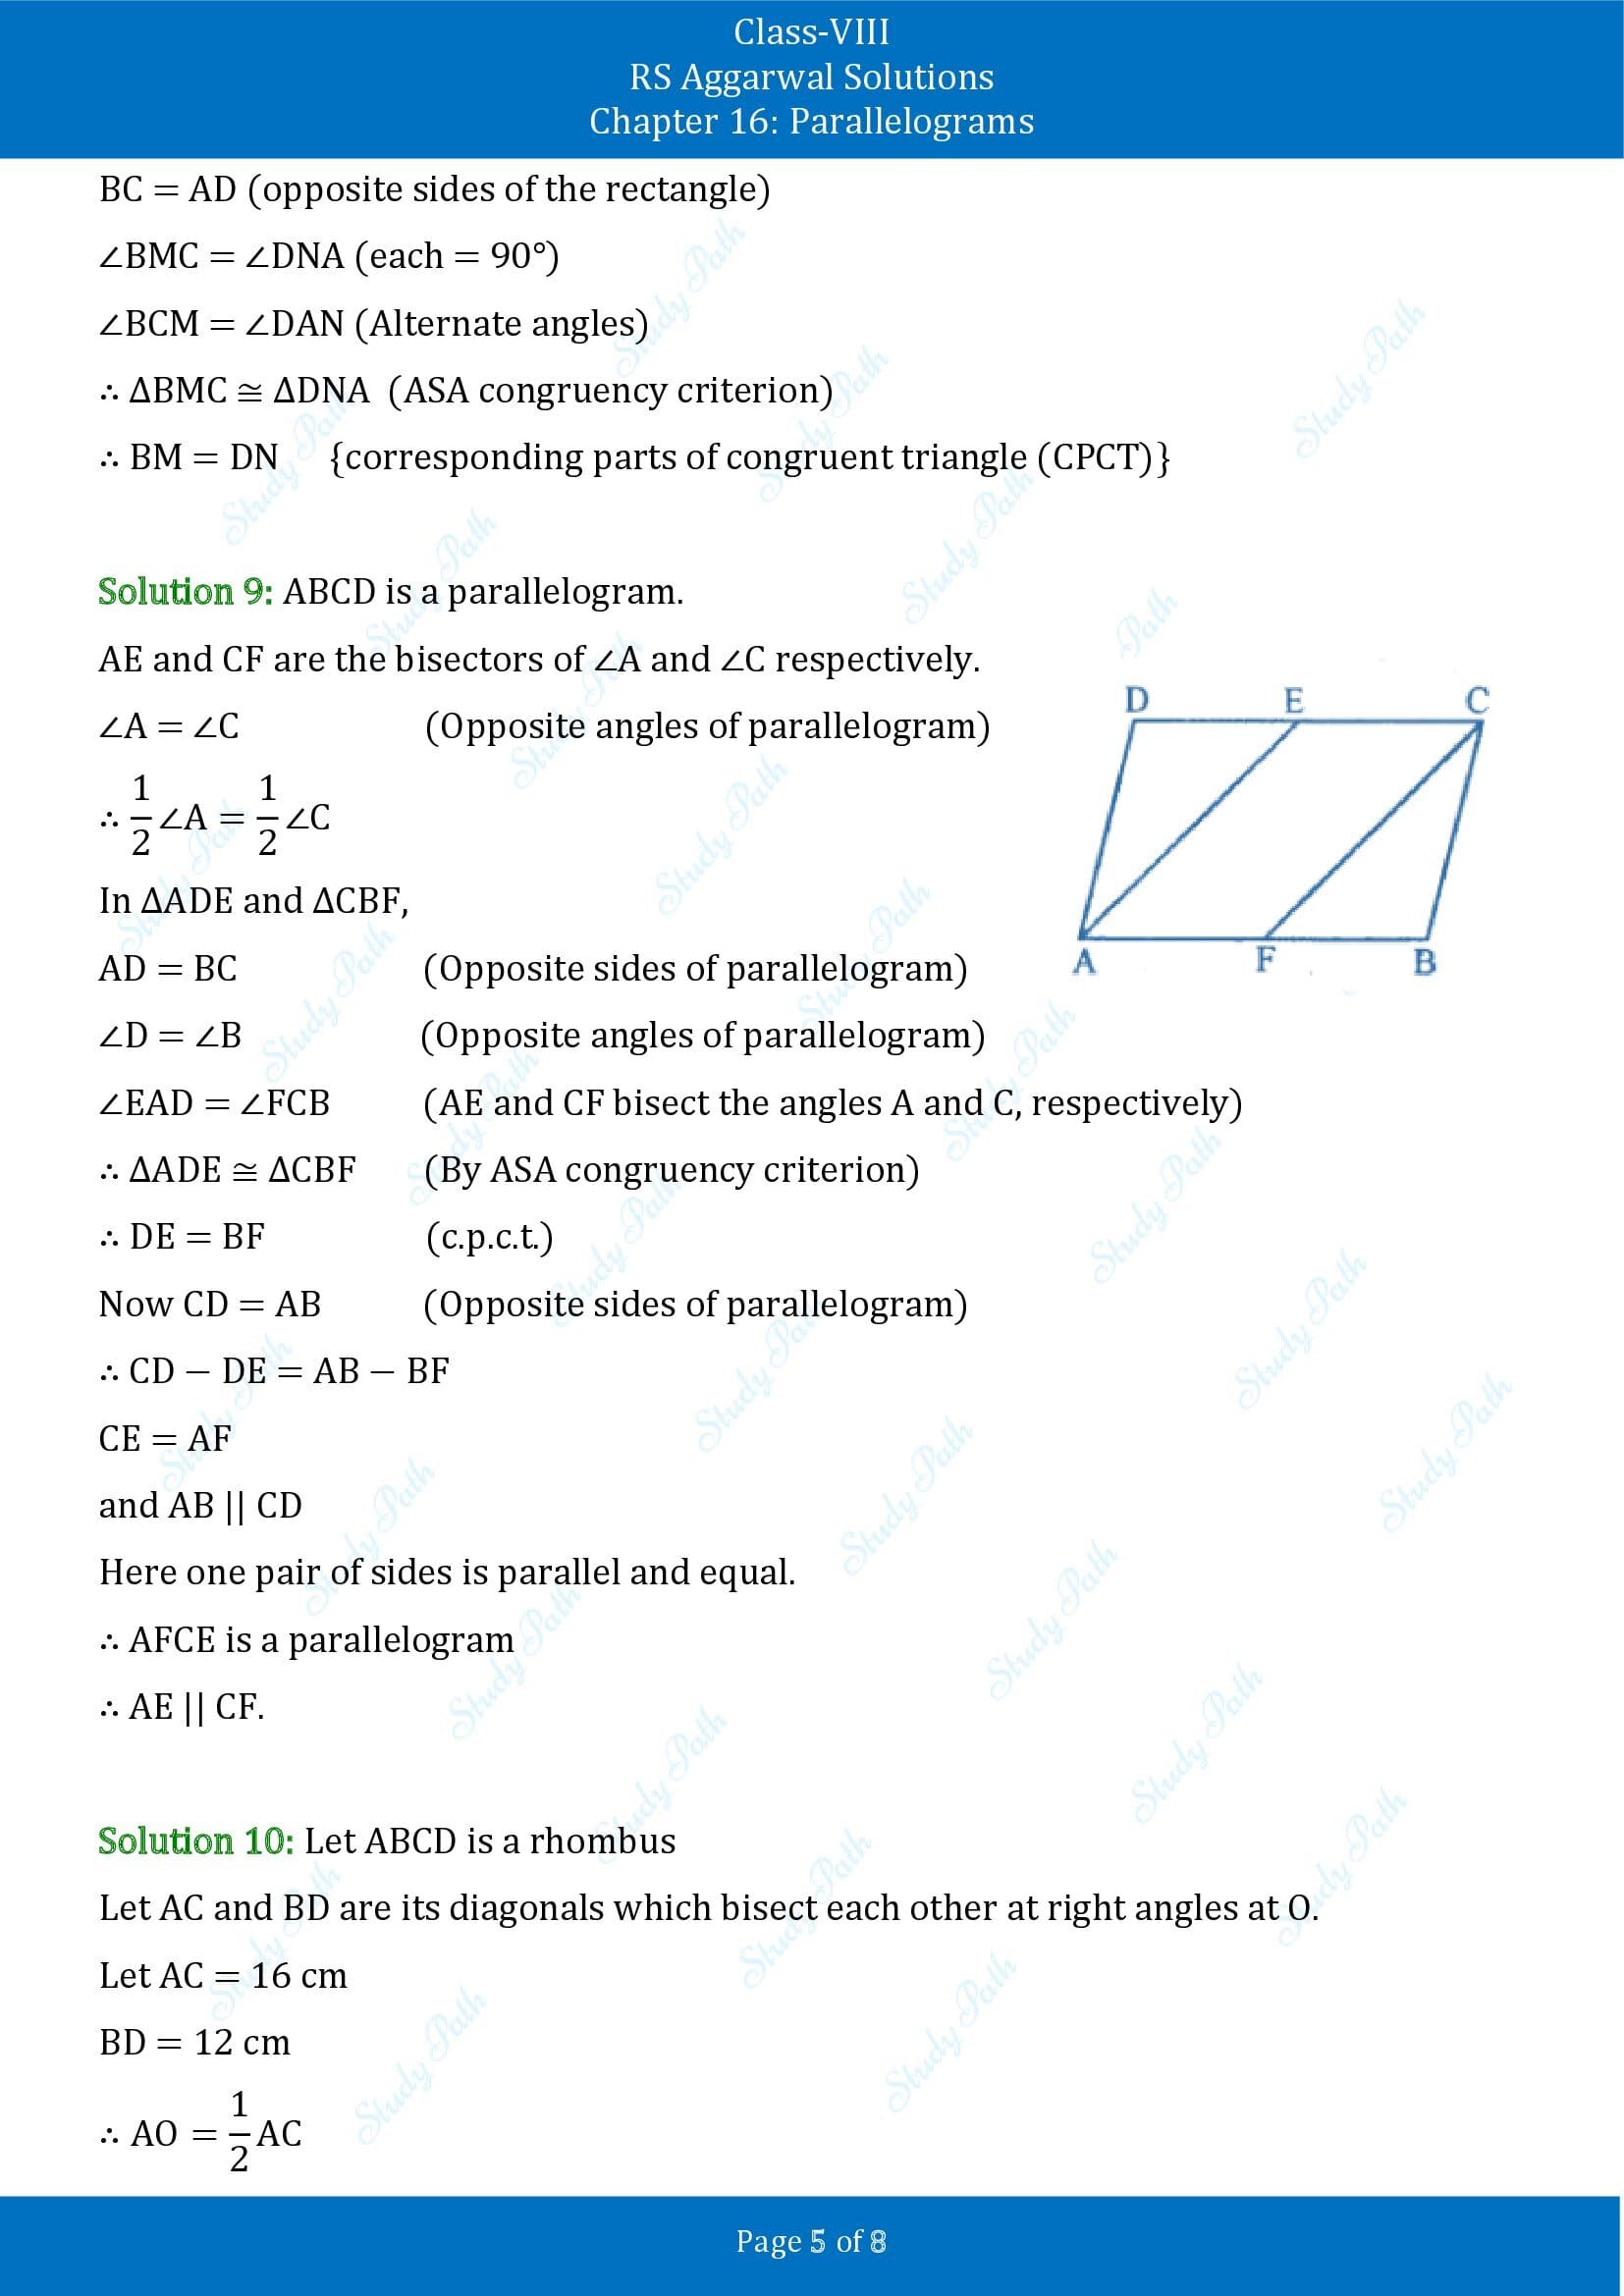 RS Aggarwal Solutions Class 8 Chapter 16 Parallelograms Exercise 16A 00005